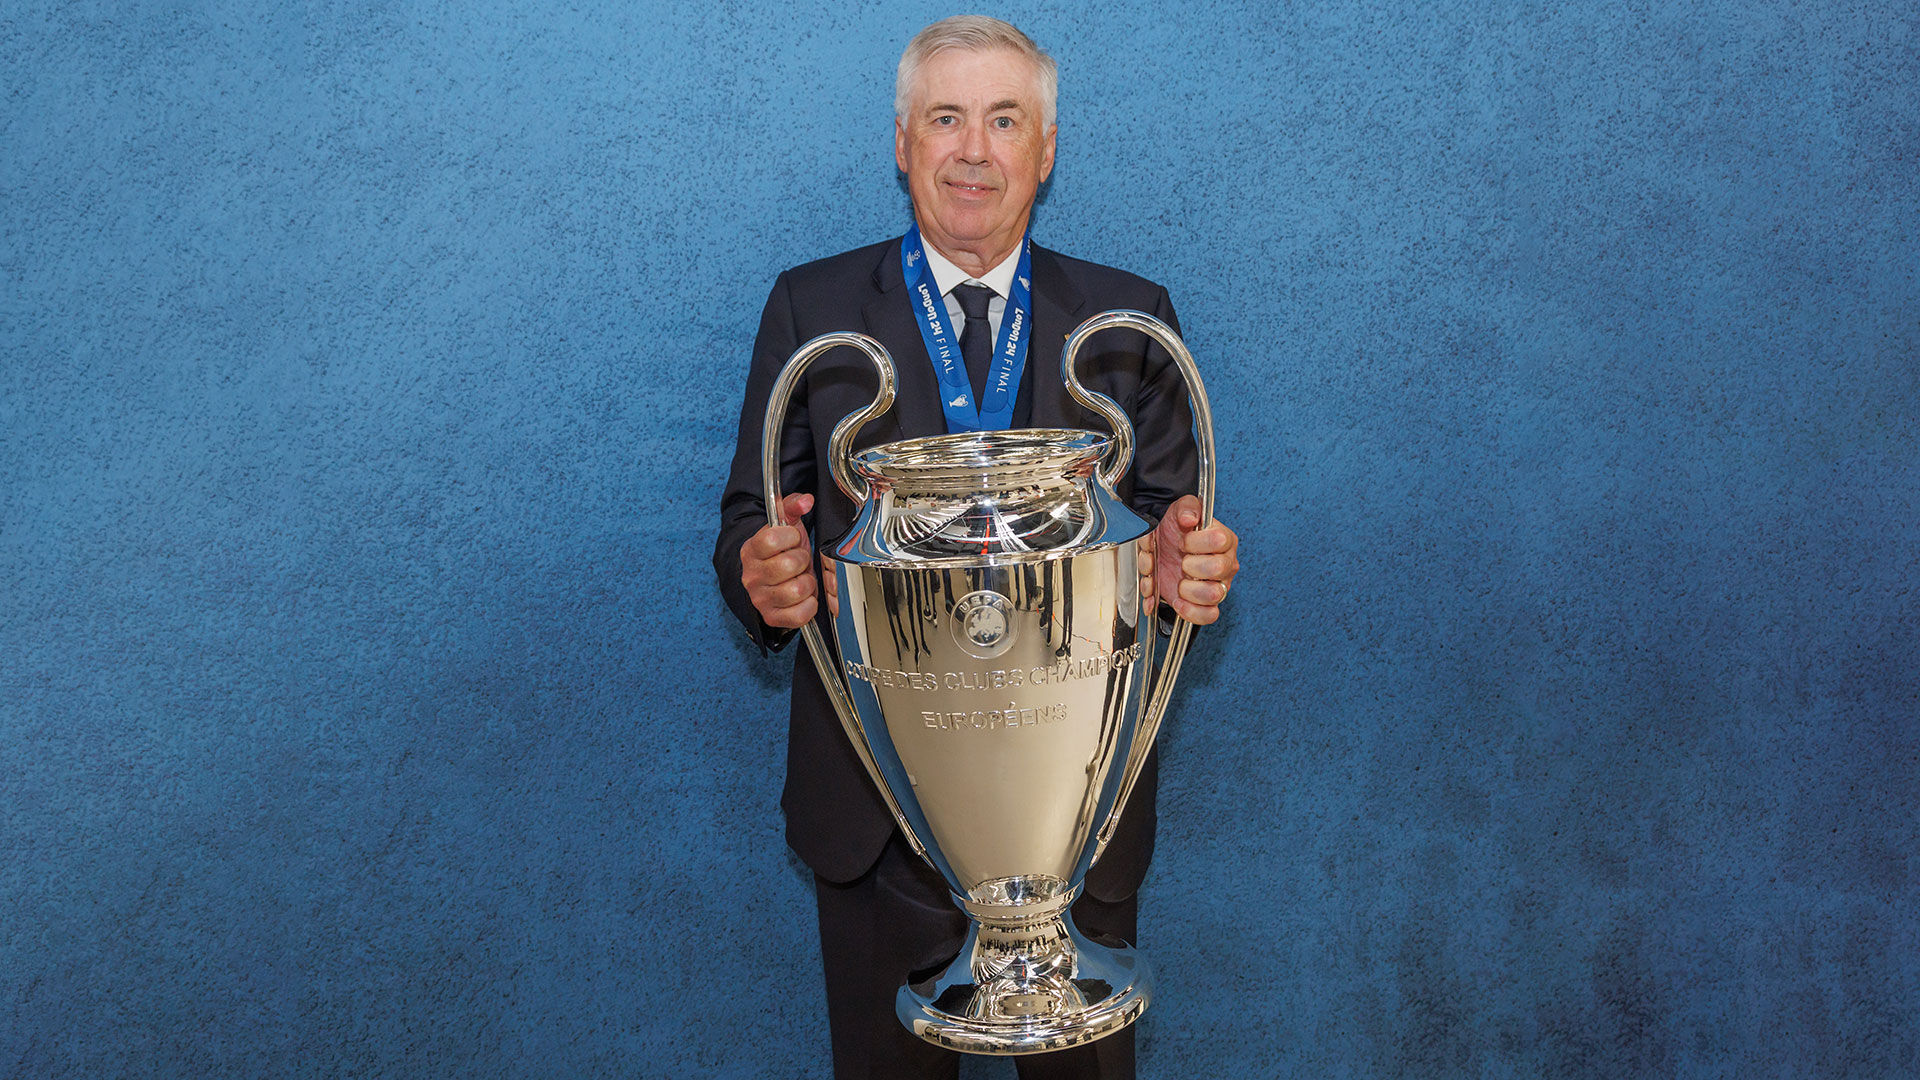 Ancelotti: "This Champions League was won with sacrifice and quality"